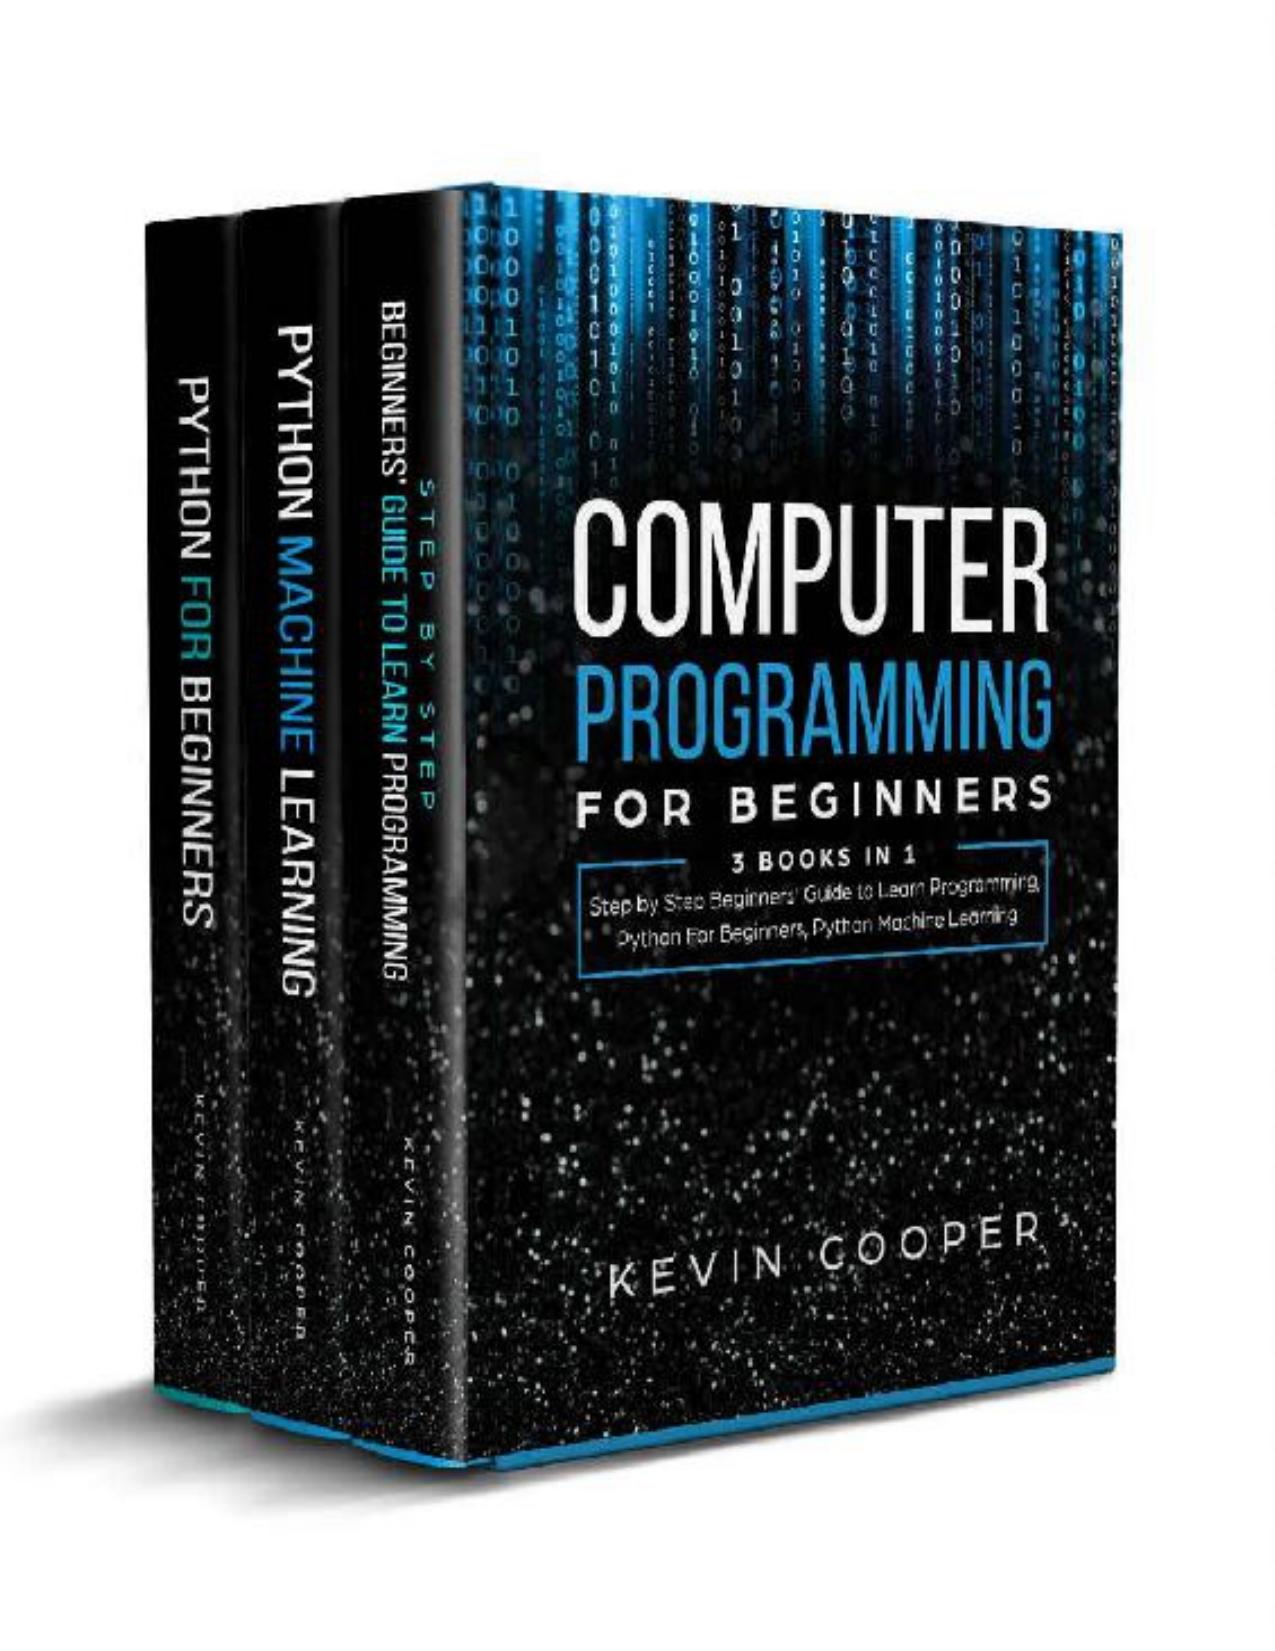 Computer Programming for Beginners: 3 Books in 1: Step by Step Guide to Learn Programming, Python For Beginners, Python Machine Learning by Kevin Cooper